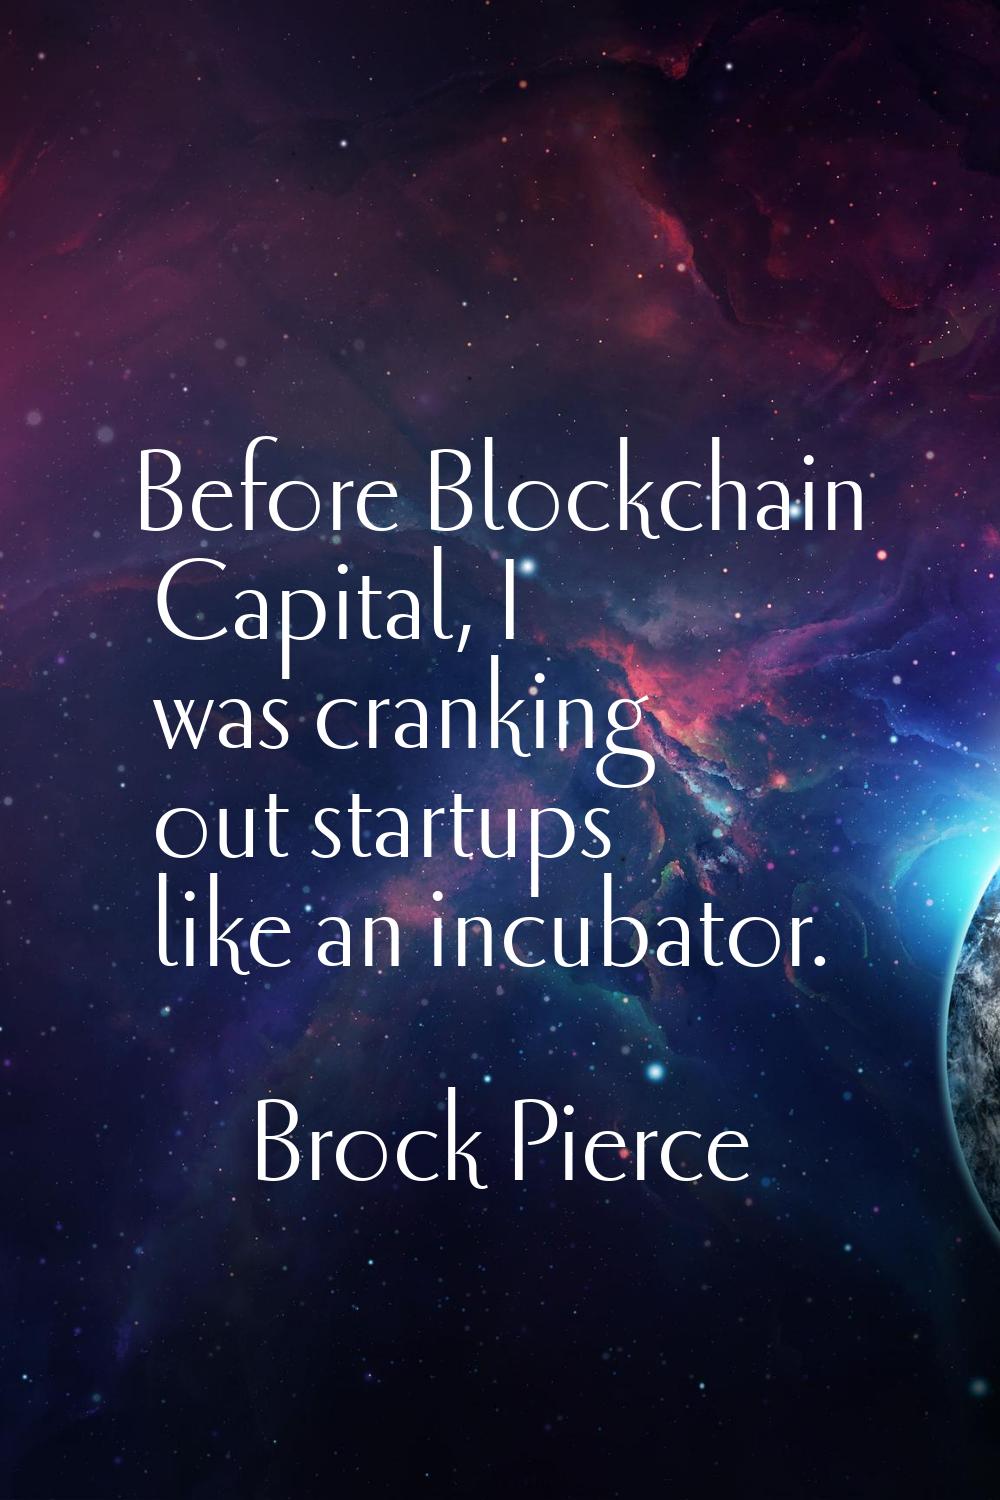 Before Blockchain Capital, I was cranking out startups like an incubator.